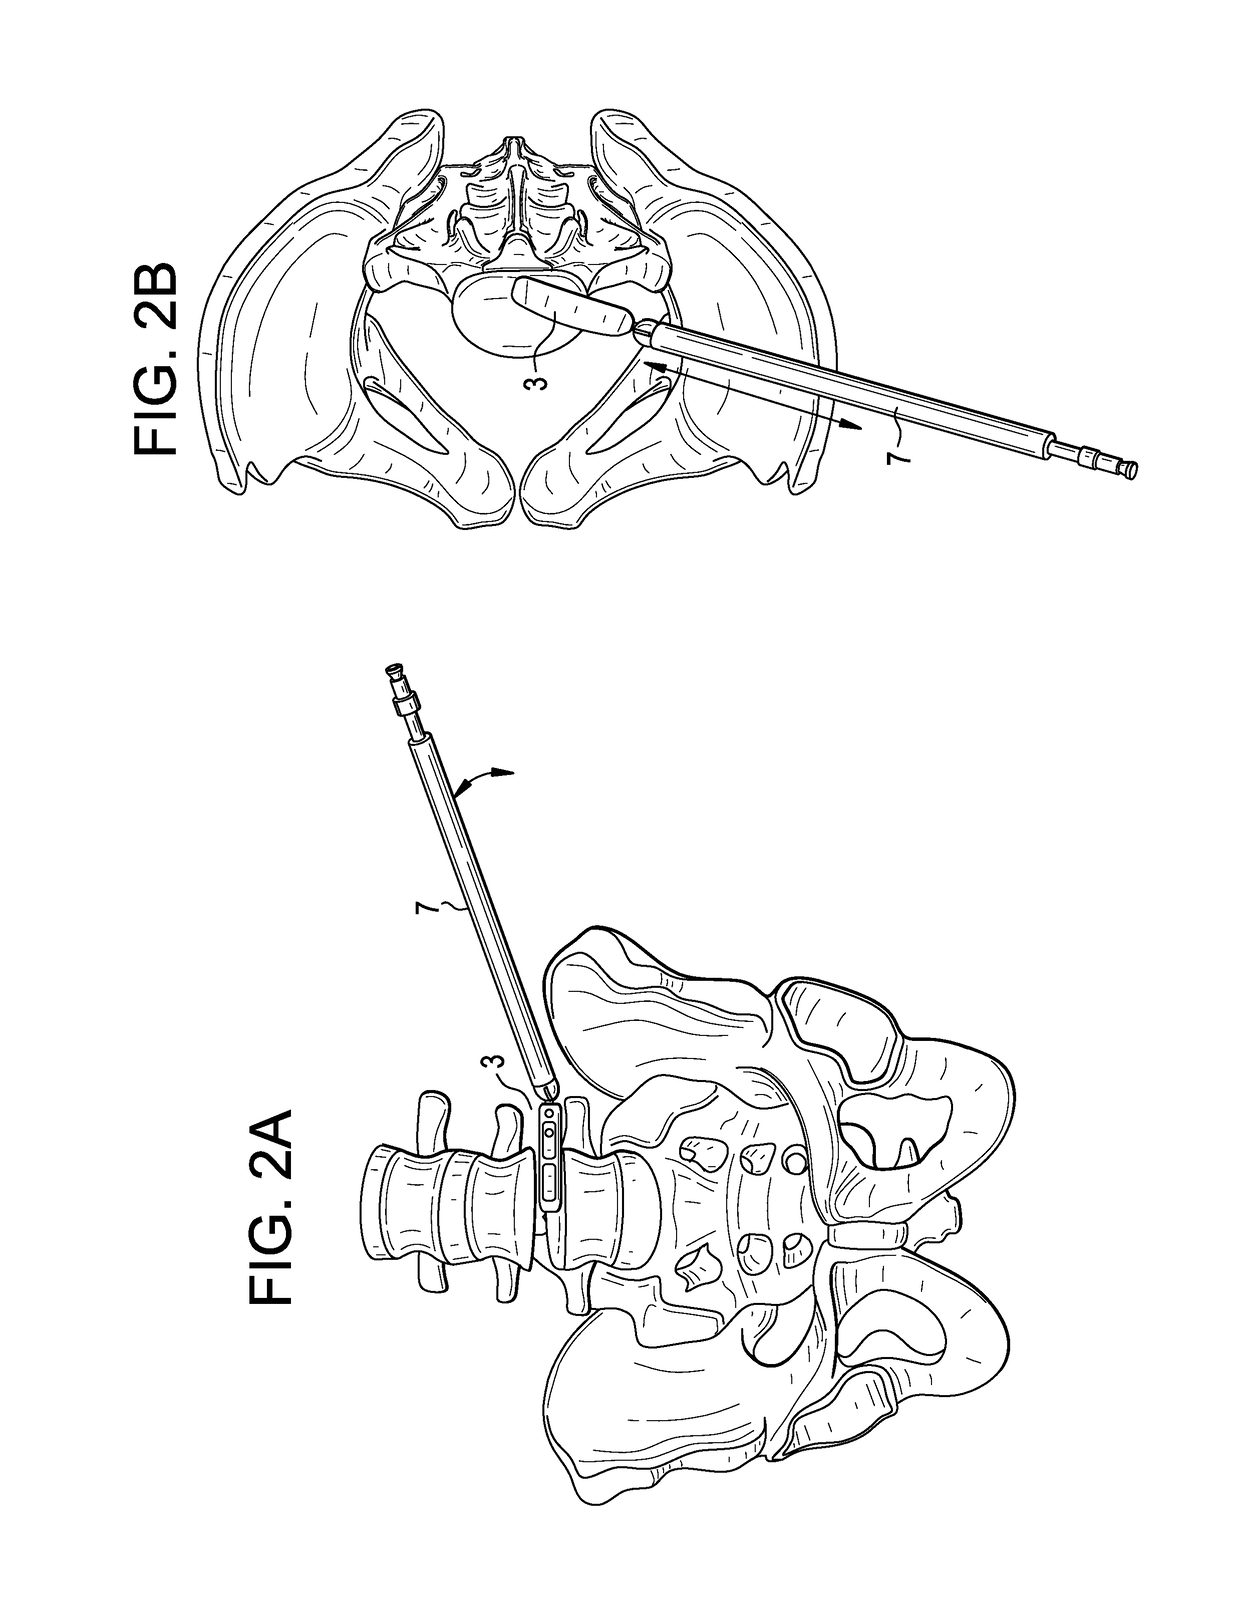 Polyaxial articulating instrument